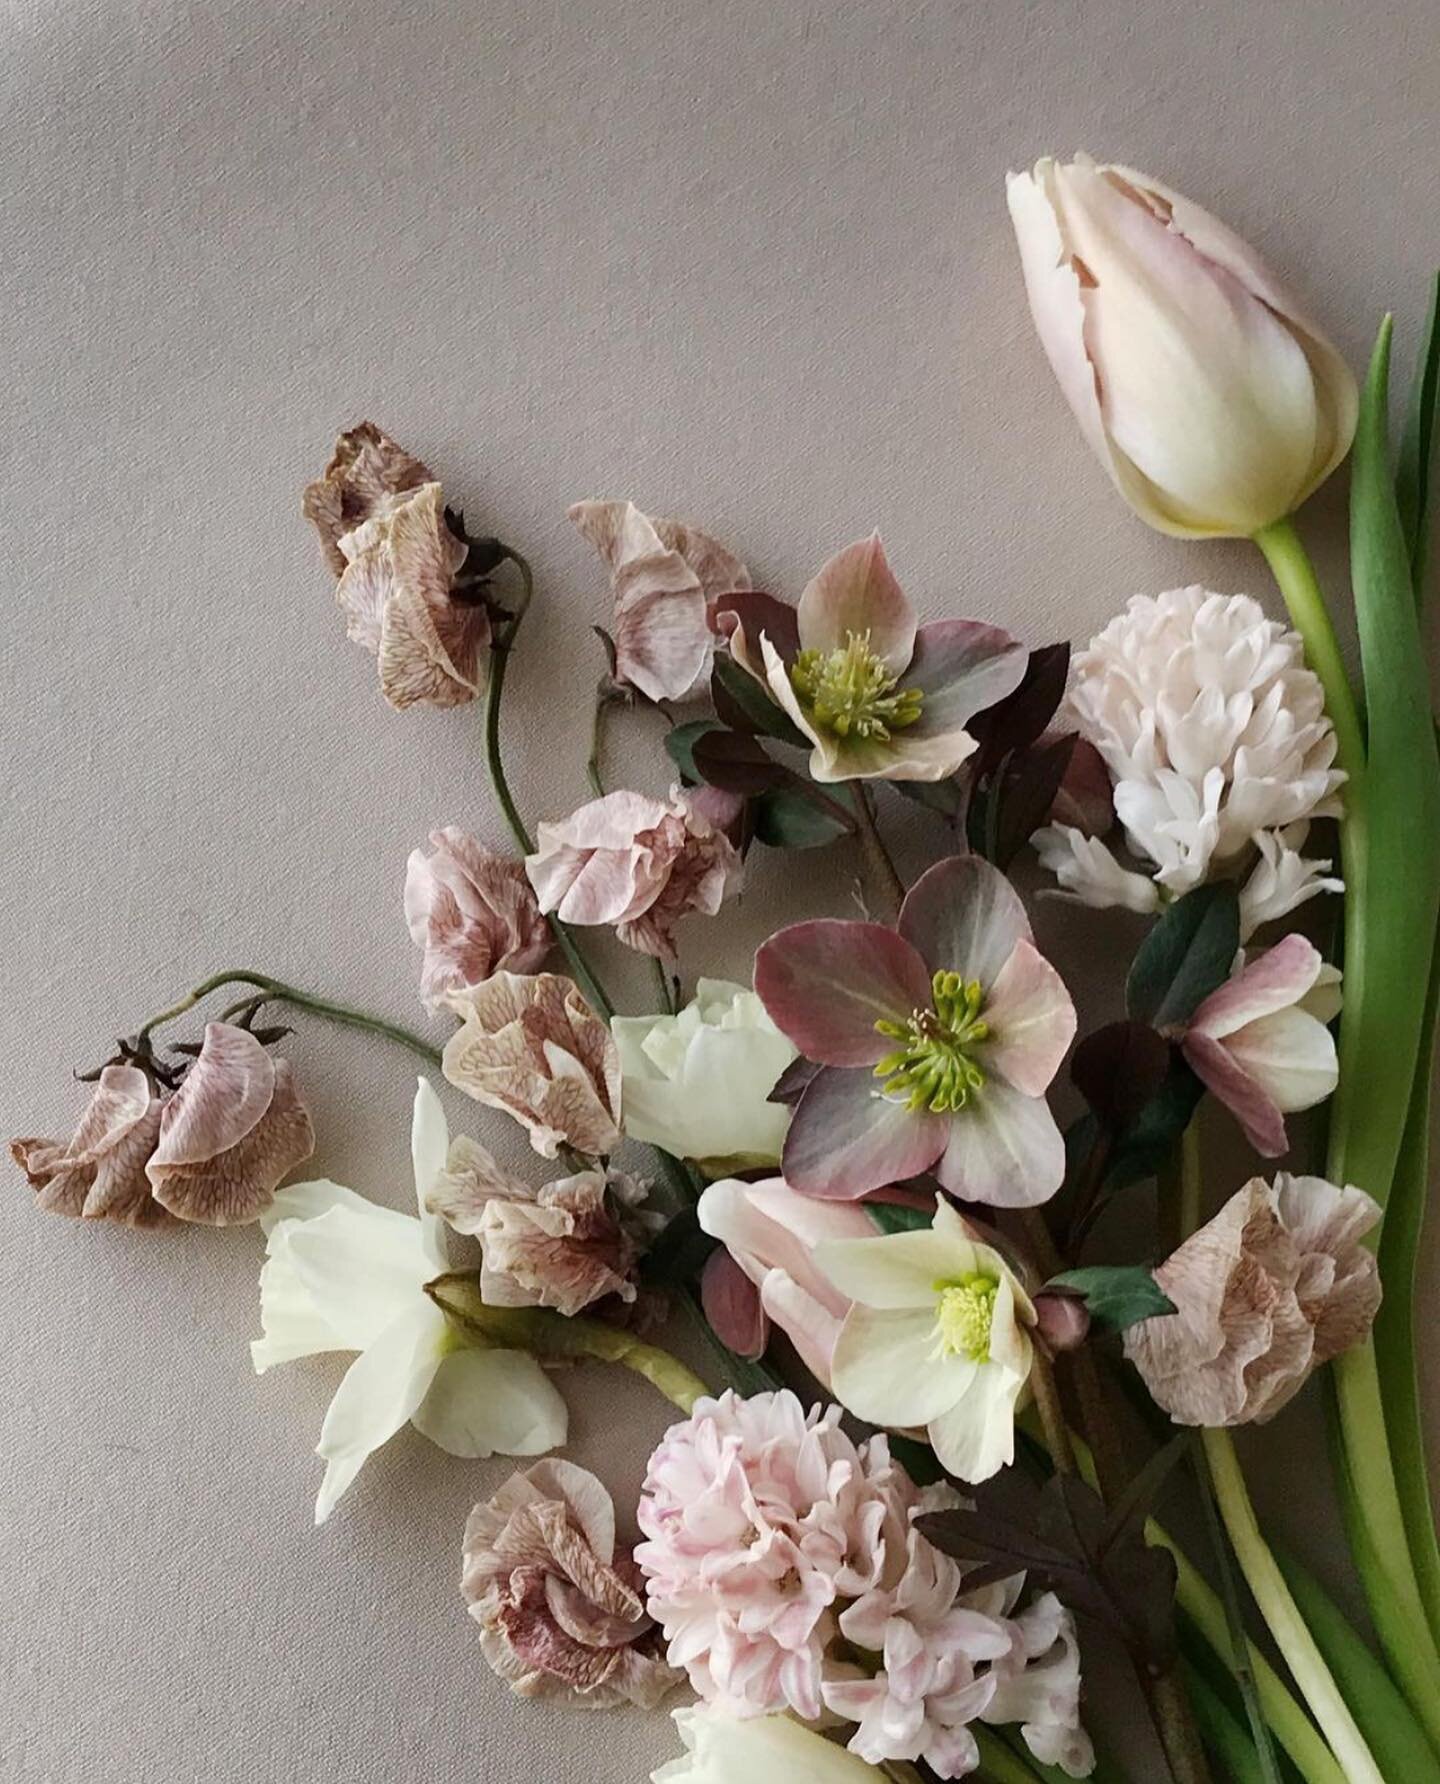 Loving these beautifully muddy spring hues from the talented @mossfloral. I can only imagine the beautiful arrangement these stems were placed into. 

#sobridaltheory #fineartflorals #fineartwedding #fineartweddings #floraldesign #postitfortheaesthet